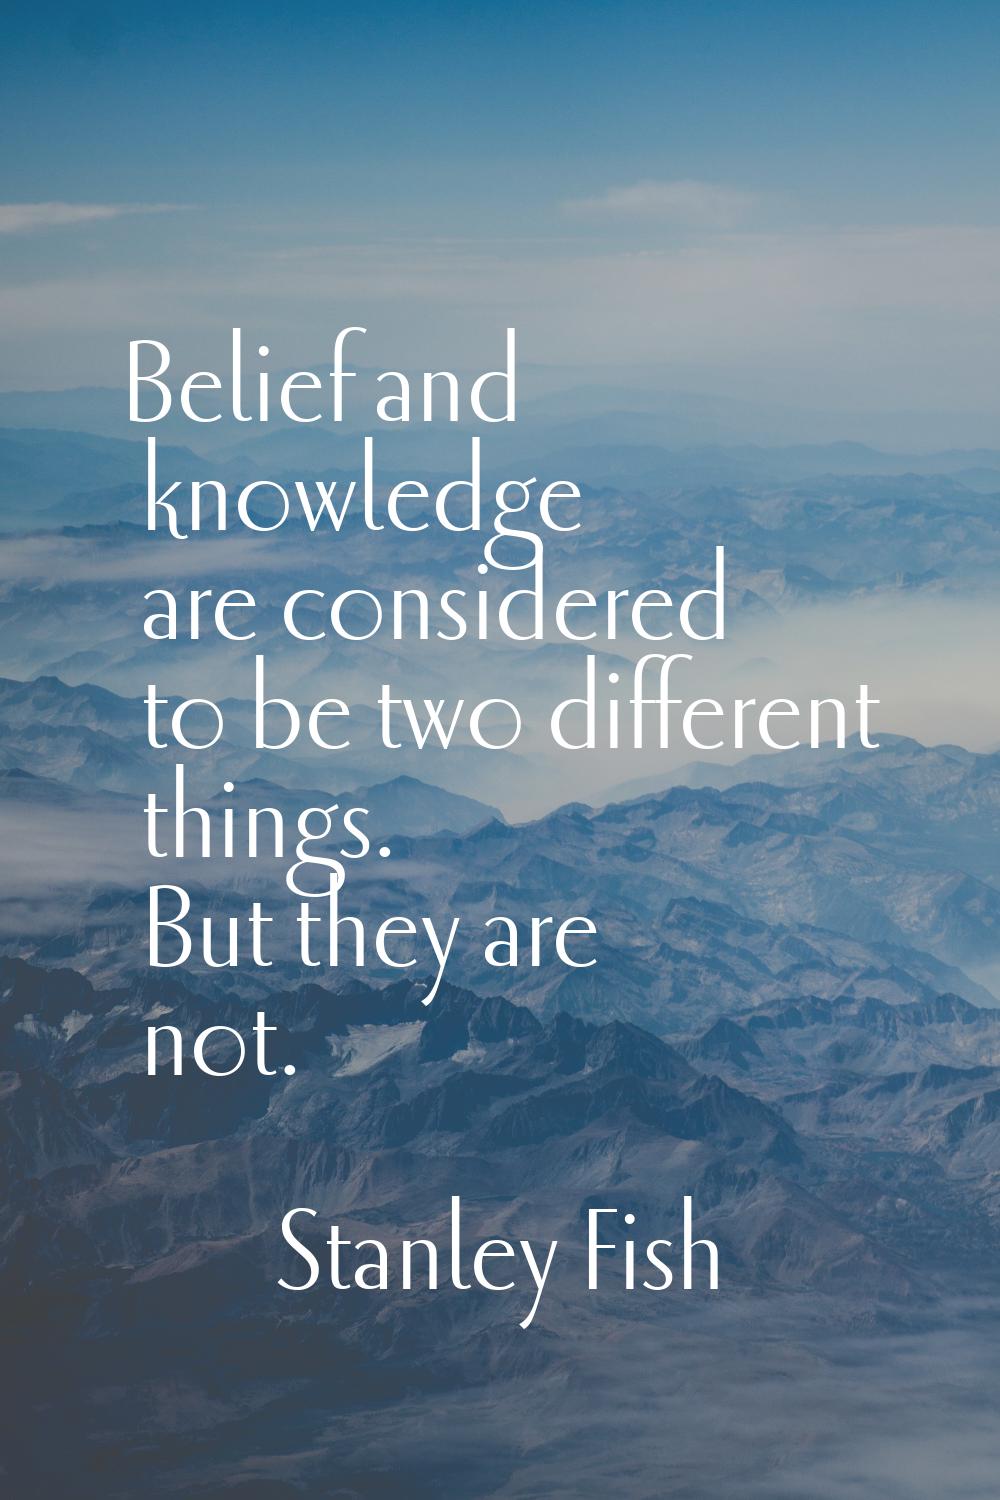 Belief and knowledge are considered to be two different things. But they are not.